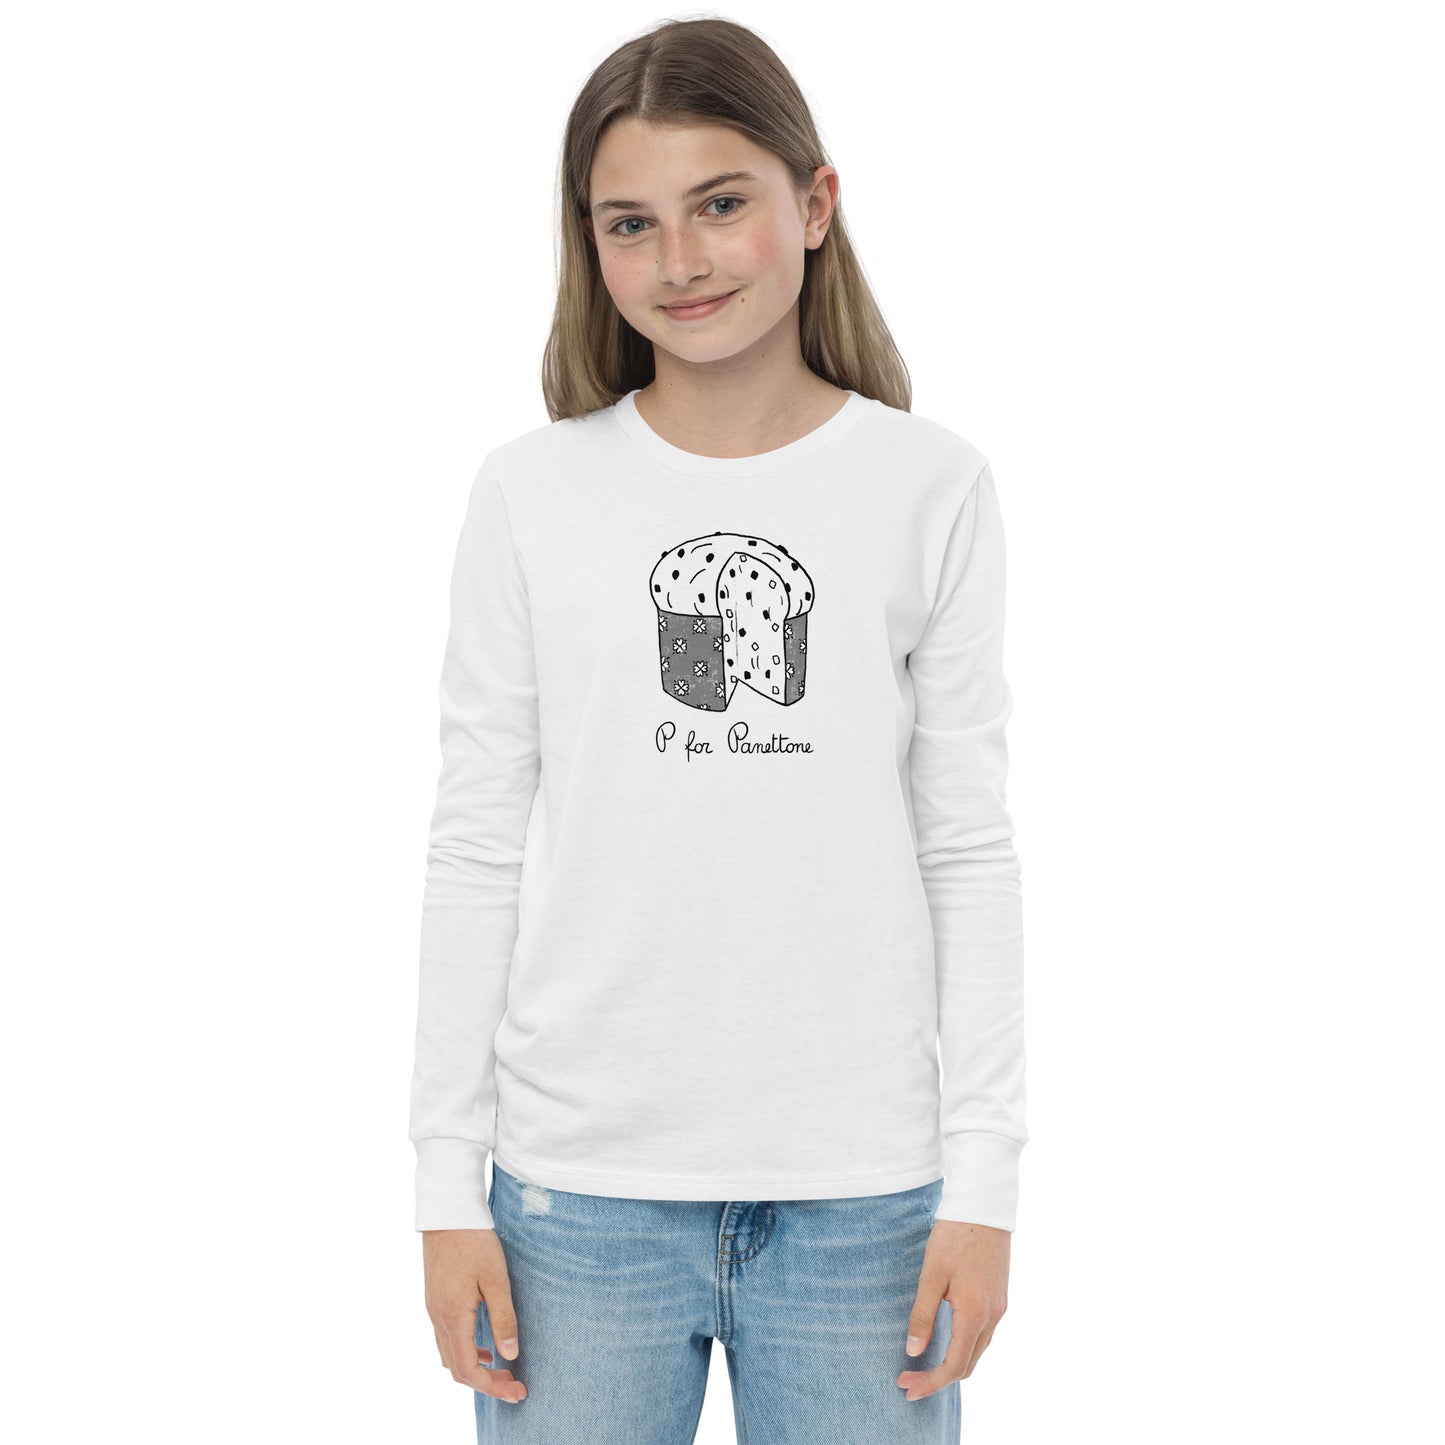 Panettone on a Youth long sleeve tee